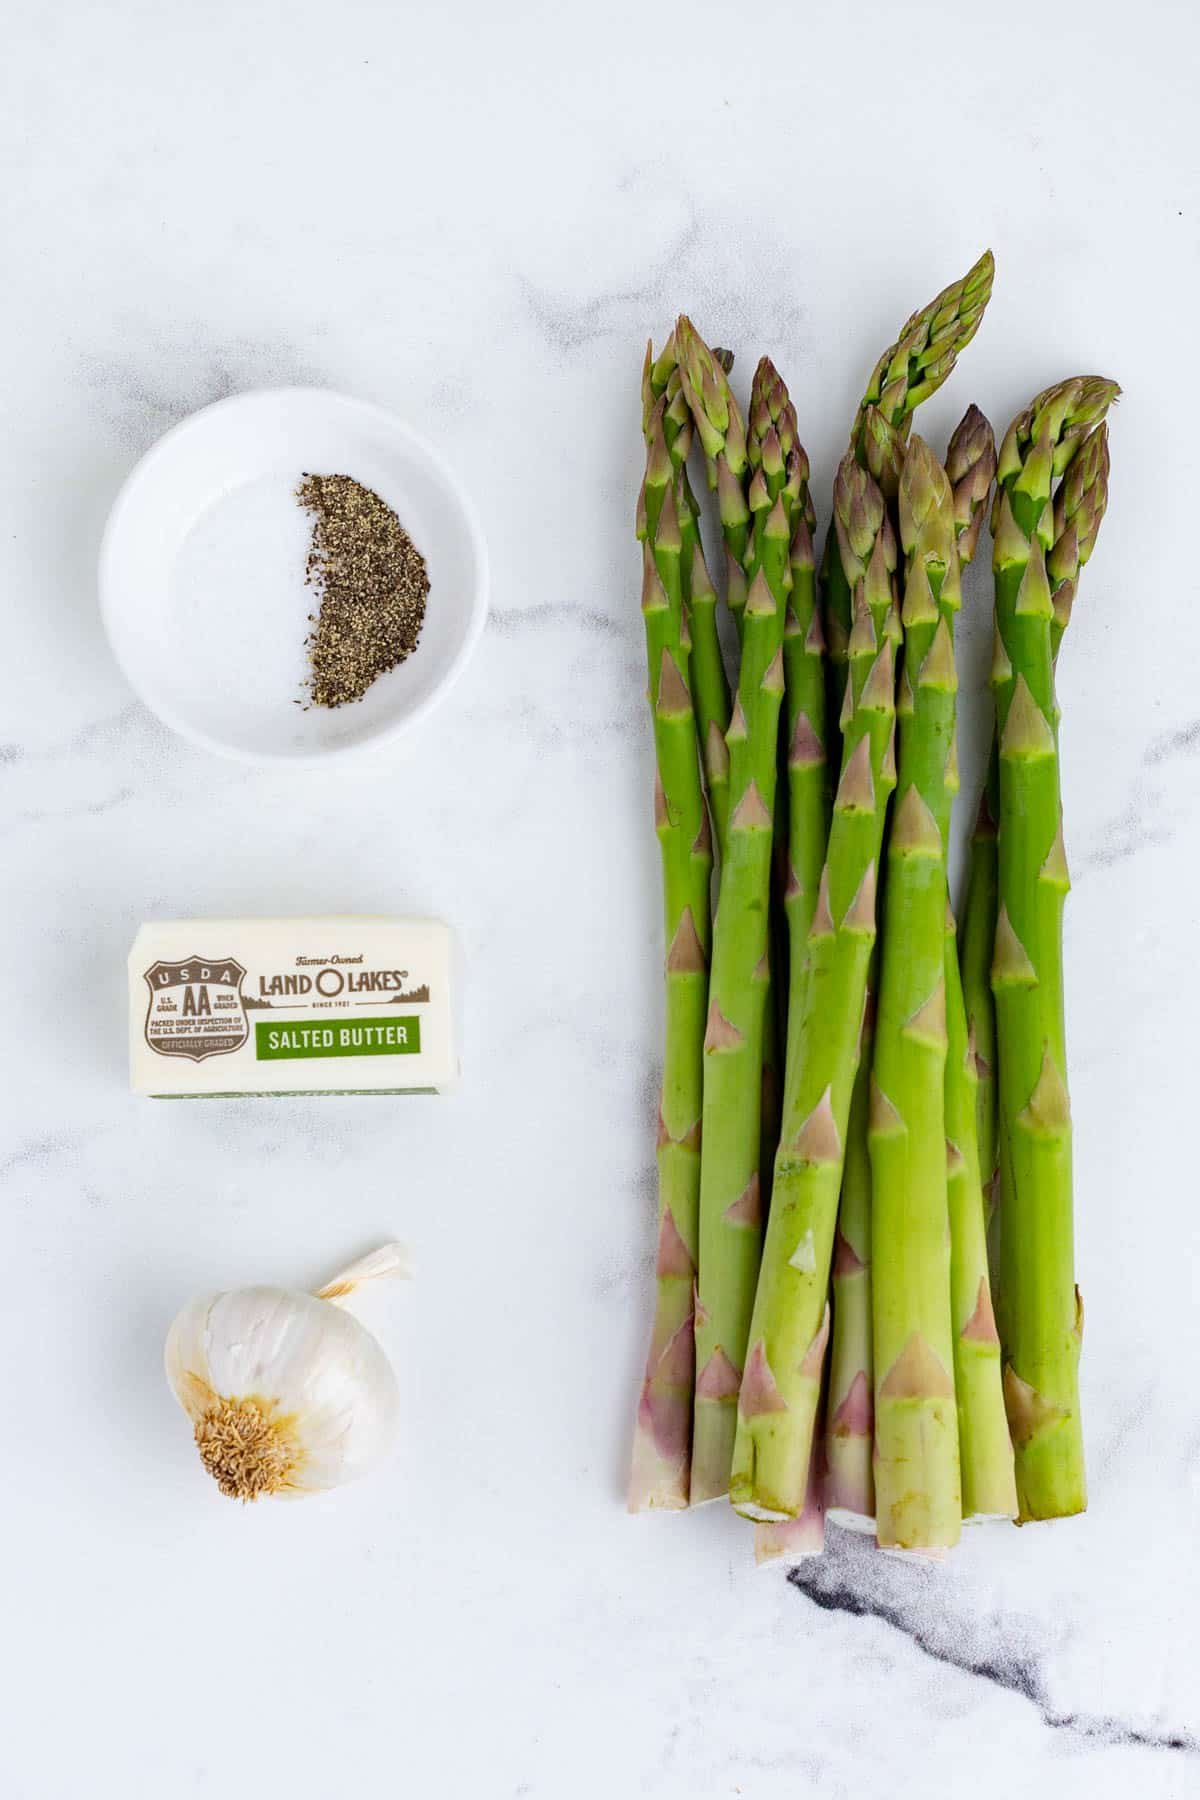 Asparagus, butter, and seasonings are the ingredients for this dish.